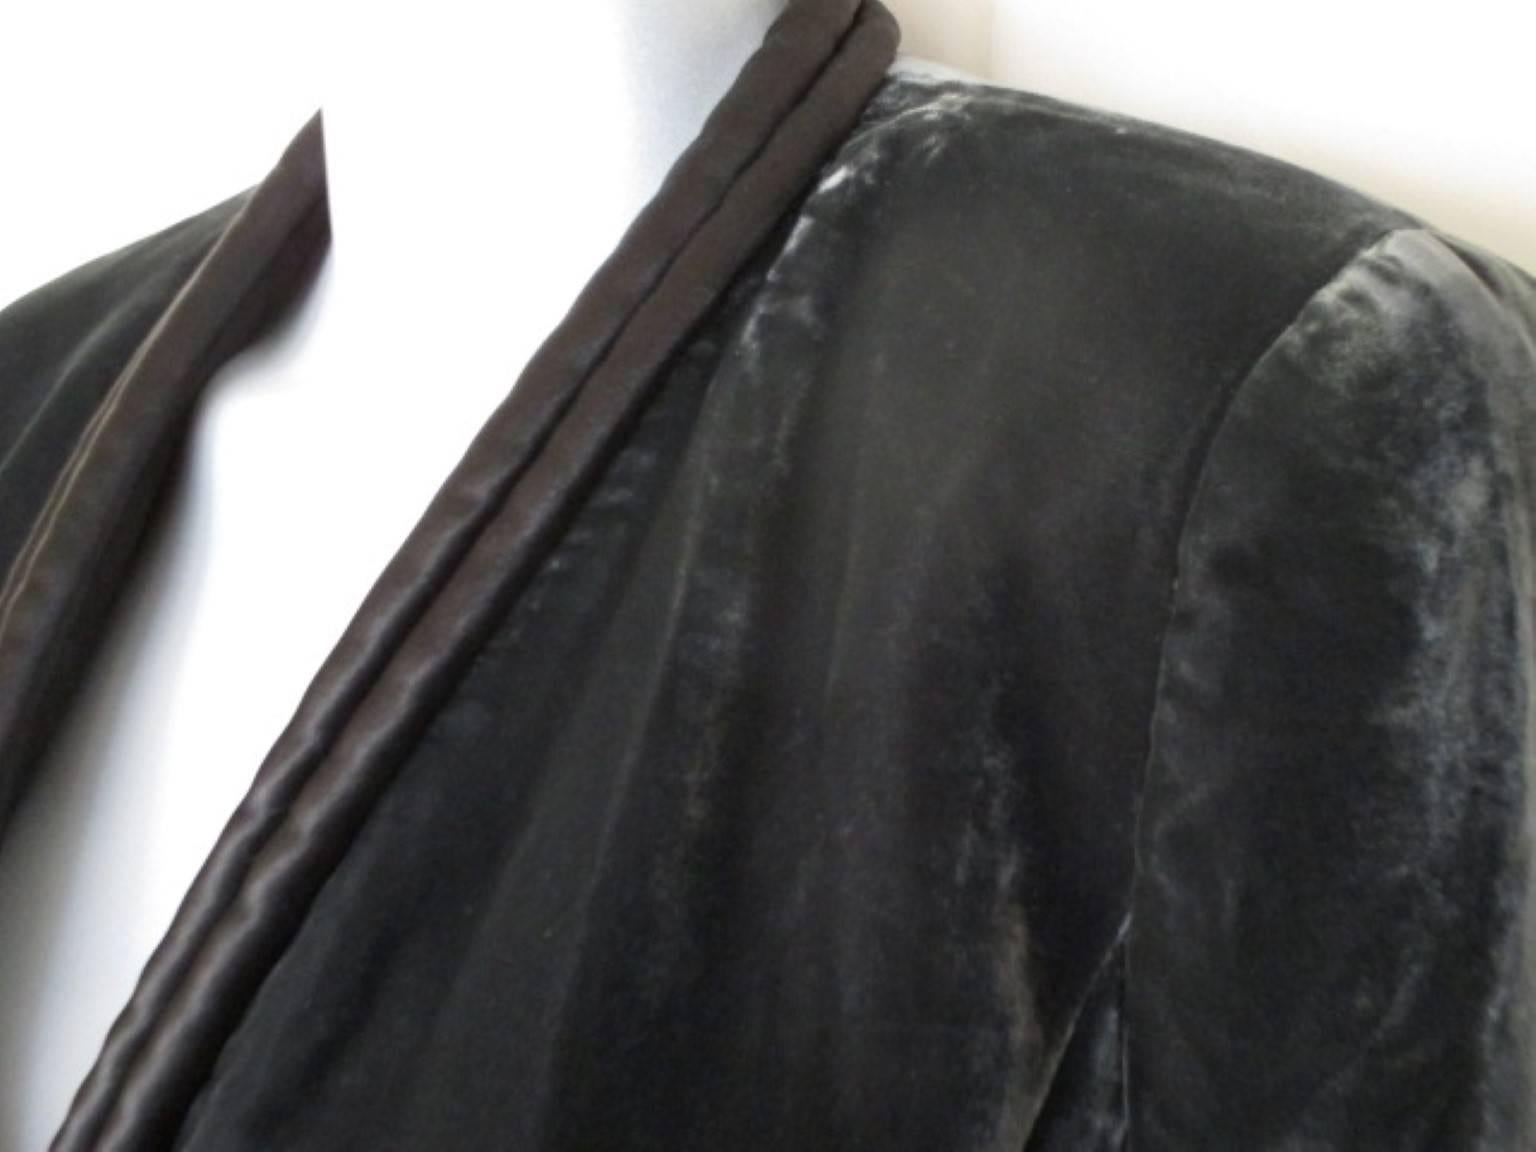 This jacket is a few times worn and made from shimmery soft velvet with 2 pockets and black rolled satin cuffs and collar.
Its nice to wear with jeans a dress or for a cocktailparty.
The size is mentioned Italy 48 but fits like and Eu 40/42